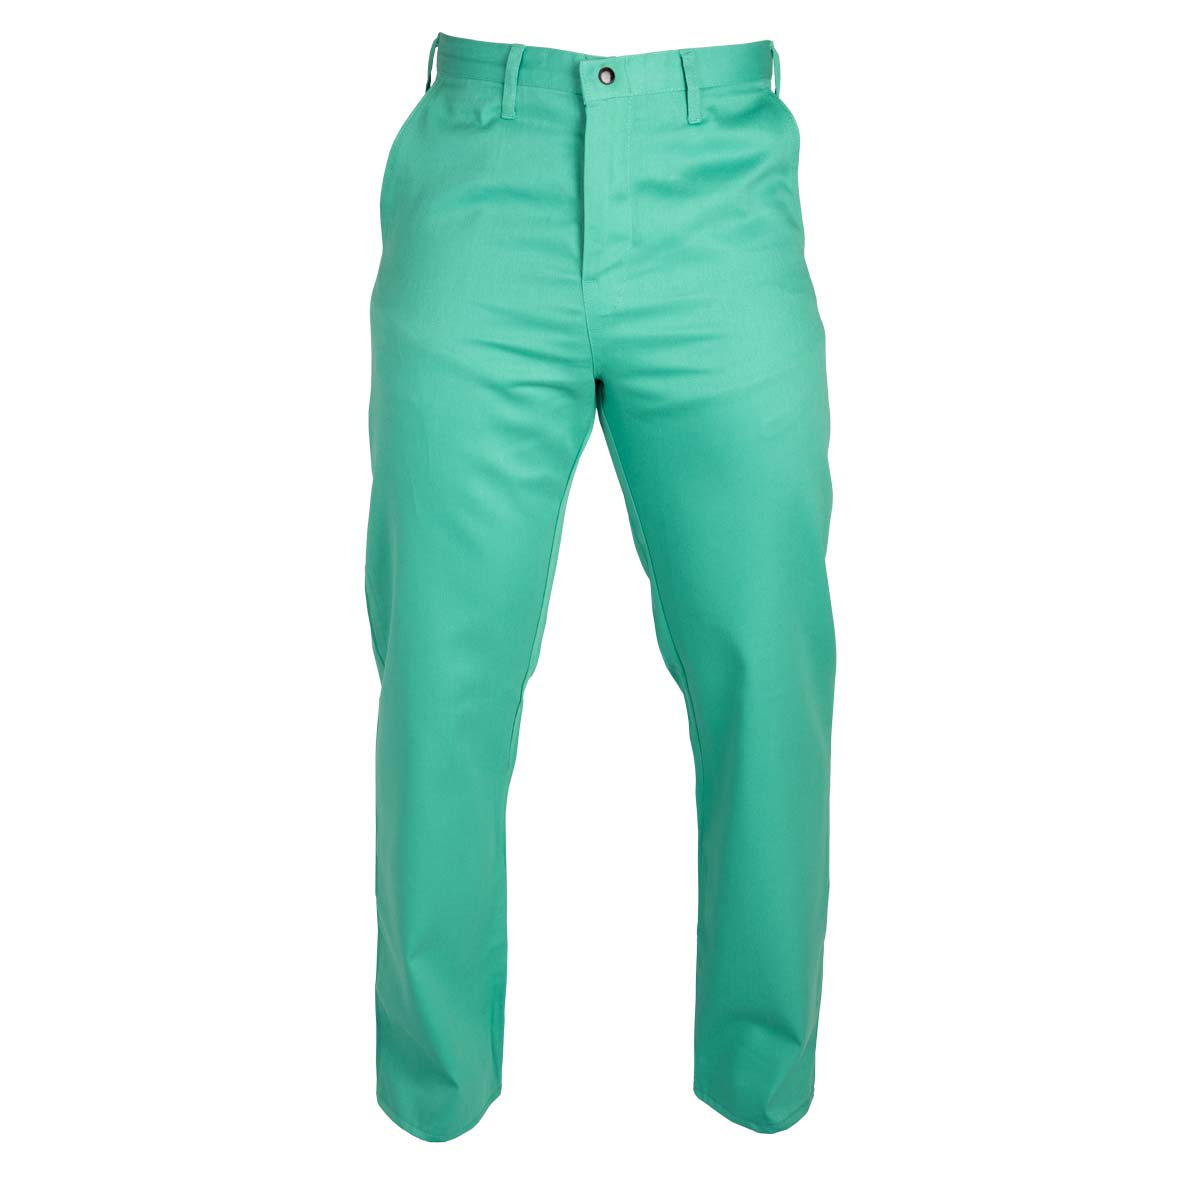 Flame Resistant Green Cotton Pants for Welding